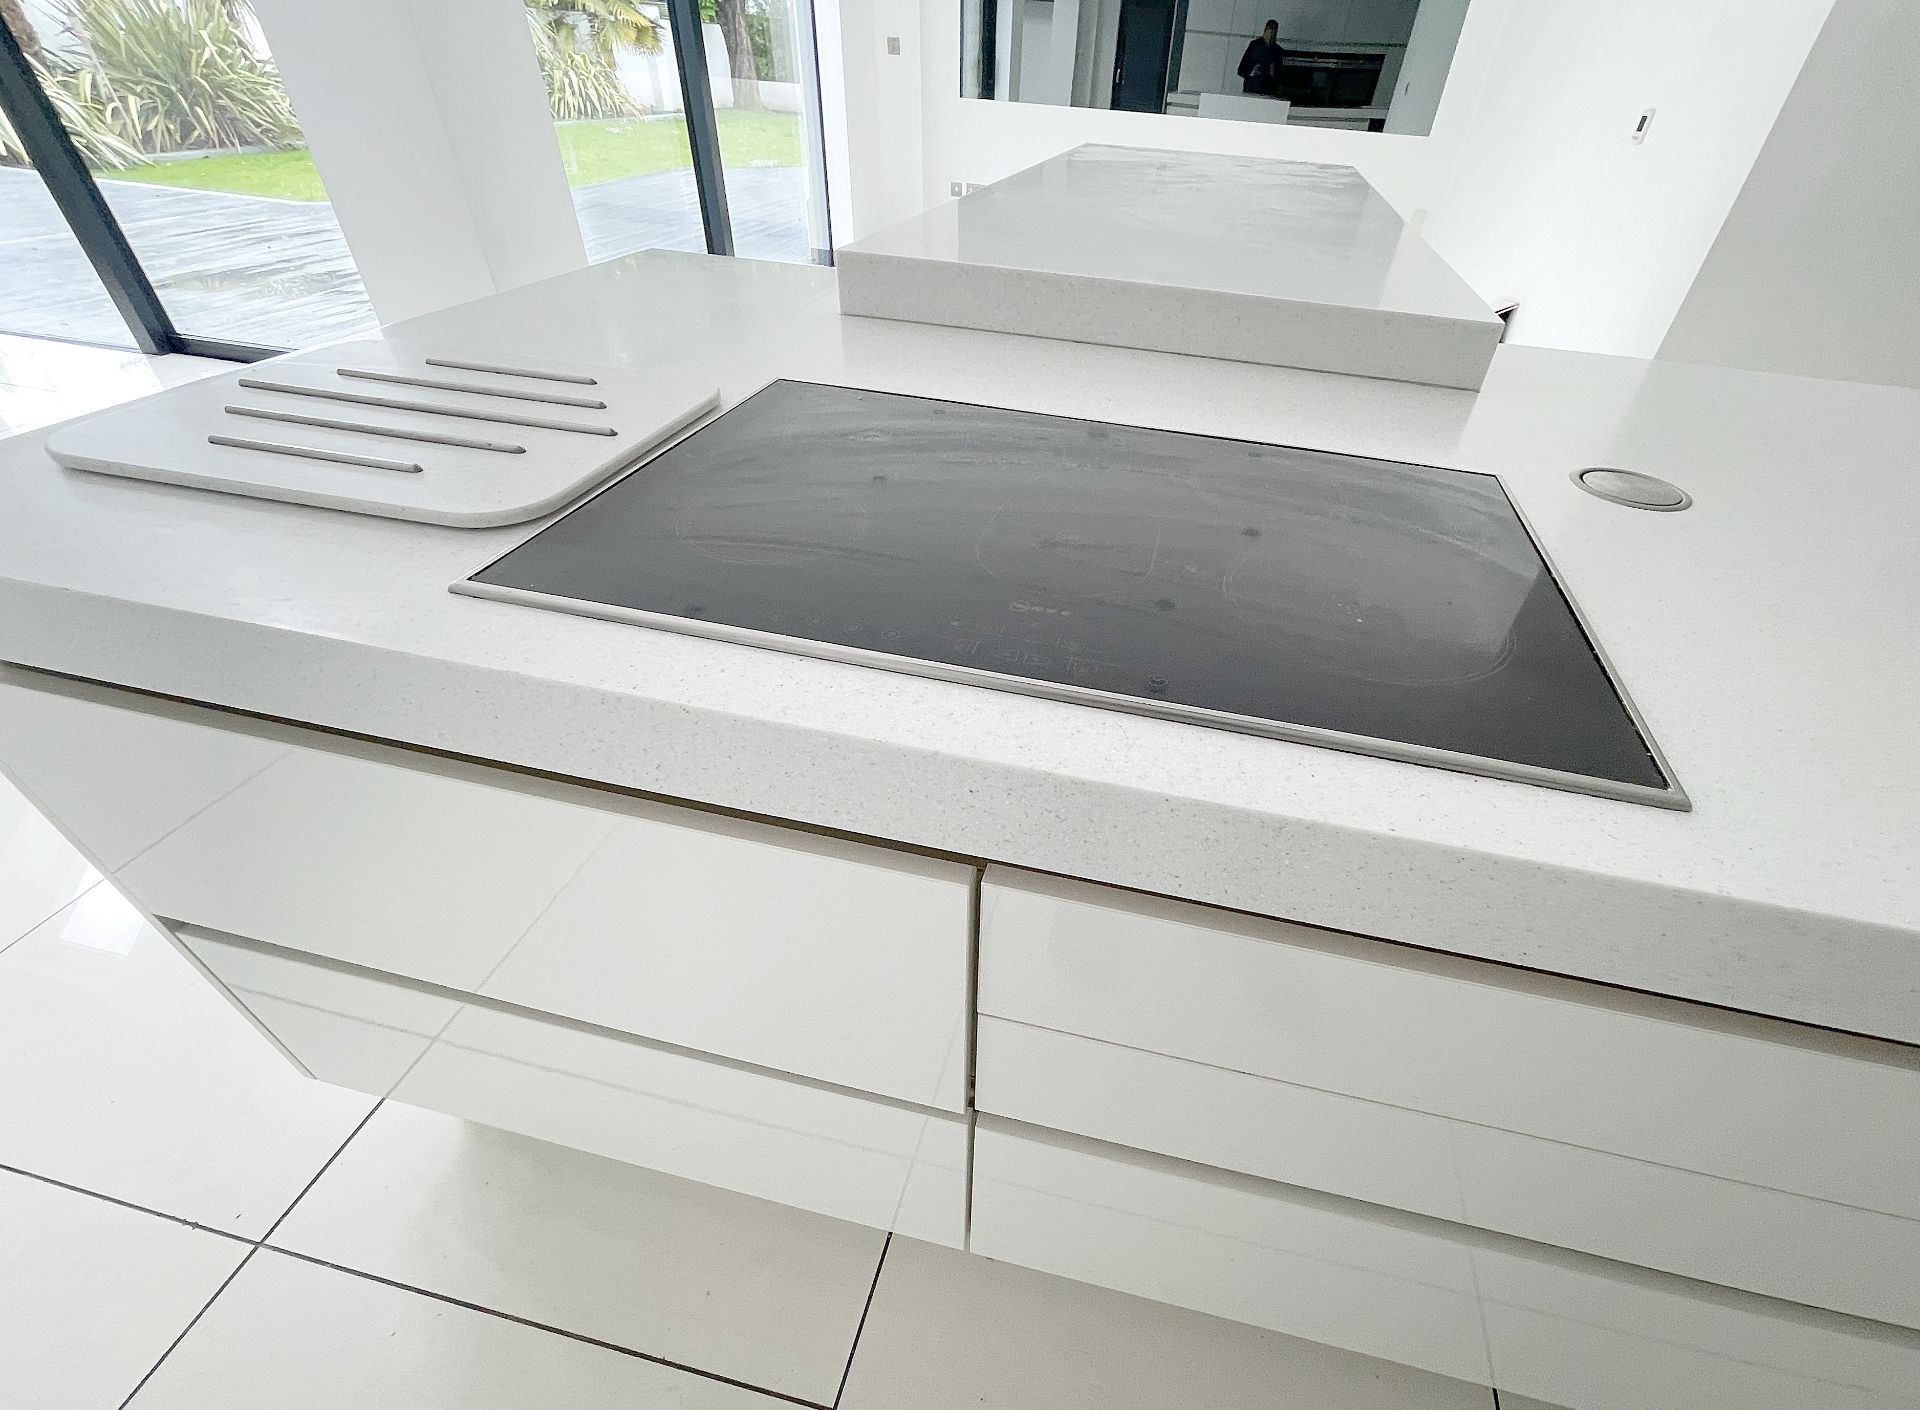 1 x SieMatic Contemporary Fitted Kitchen With Branded Appliances, Central Island + Corian Worktops - Image 22 of 100